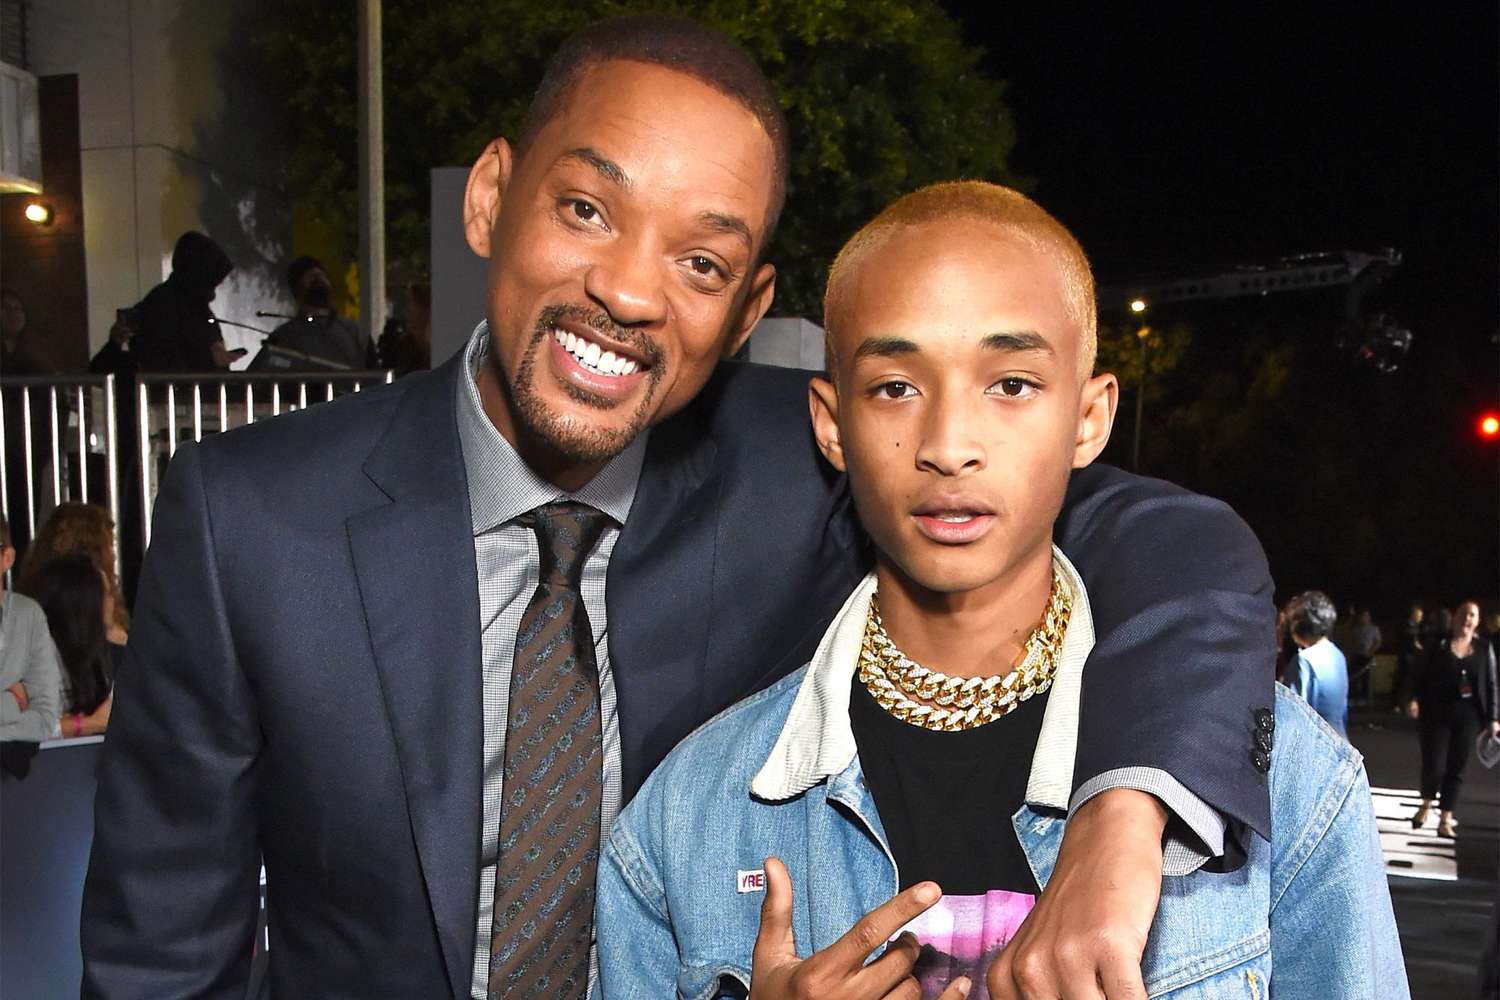 LOS ANGELES, CA - DECEMBER 13: Will Smith (L) and Jaden Smith attend the LA Premiere of Netflix Films 'BRIGHT' on December 13, 2017 in Los Angeles, California. (Photo by Michael Kovac/Getty Images for Netflix)